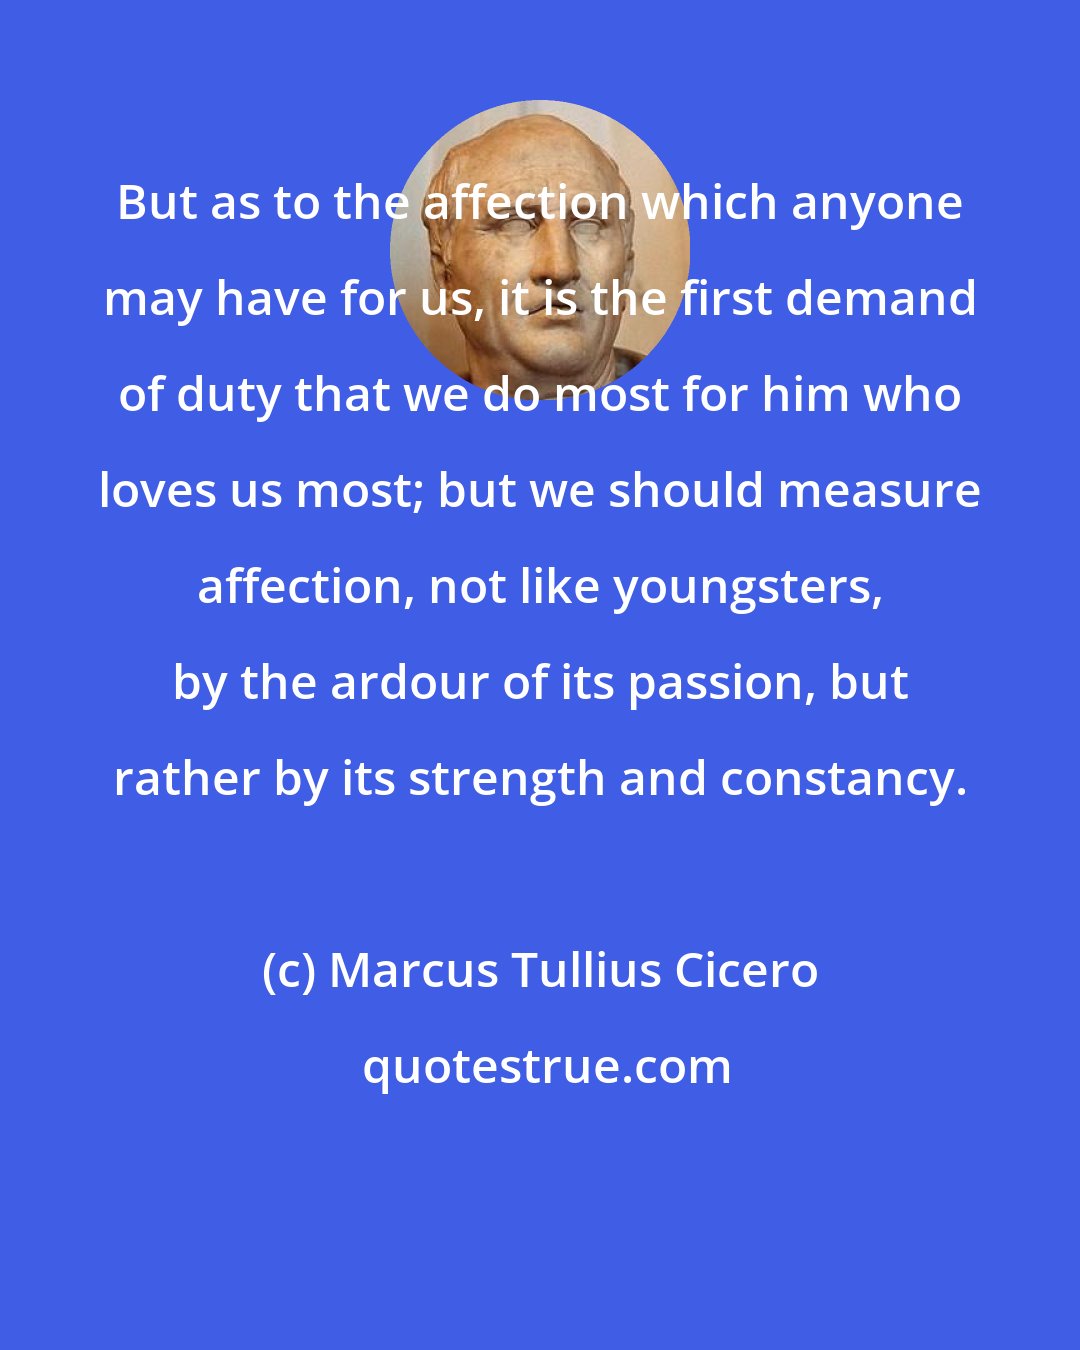 Marcus Tullius Cicero: But as to the affection which anyone may have for us, it is the first demand of duty that we do most for him who loves us most; but we should measure affection, not like youngsters, by the ardour of its passion, but rather by its strength and constancy.